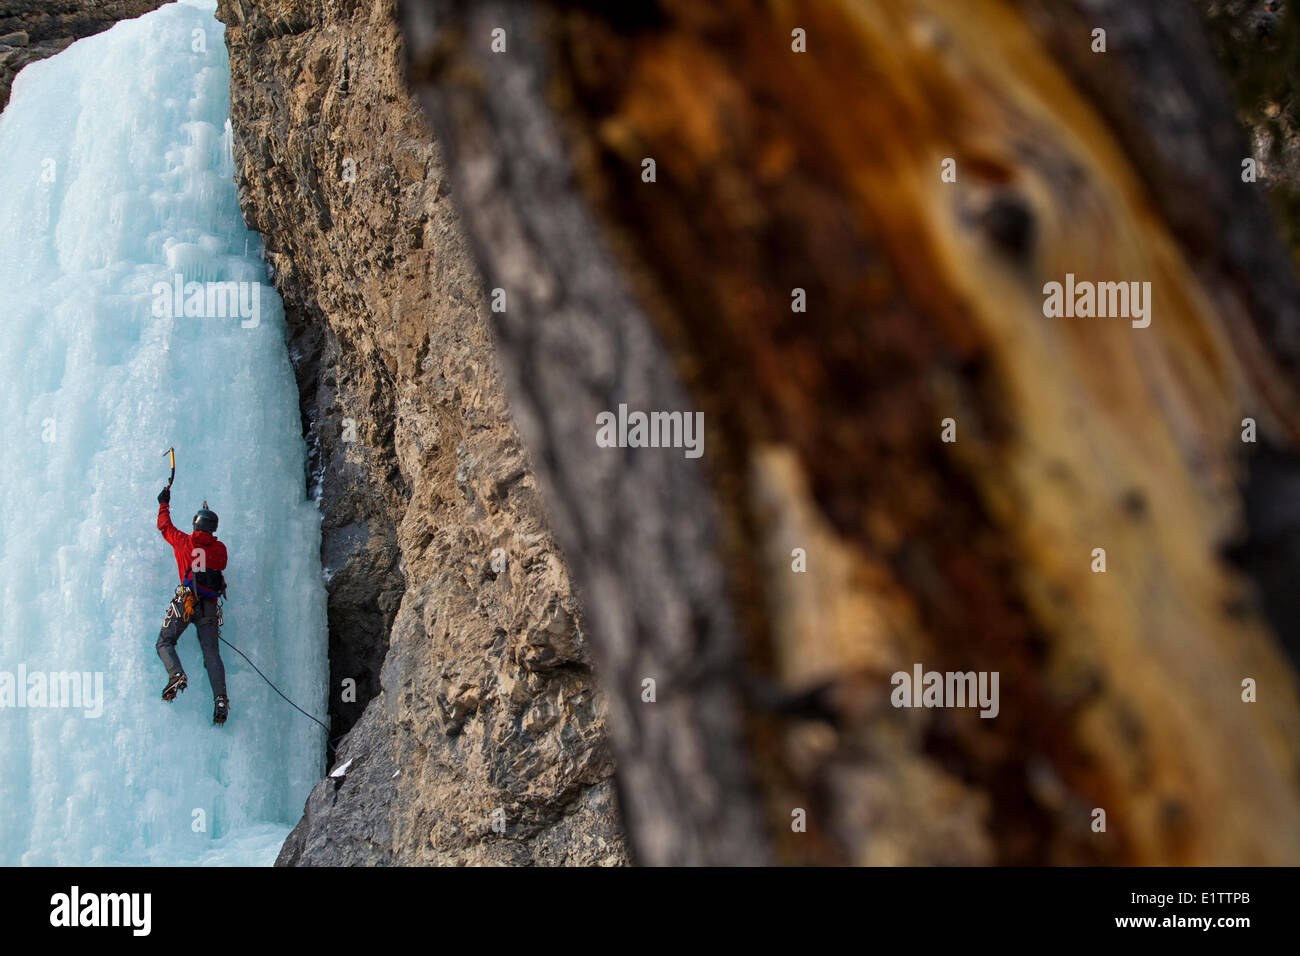 A male ice climber on Dream On WI 4, Red Deer River, AB Stock Photo